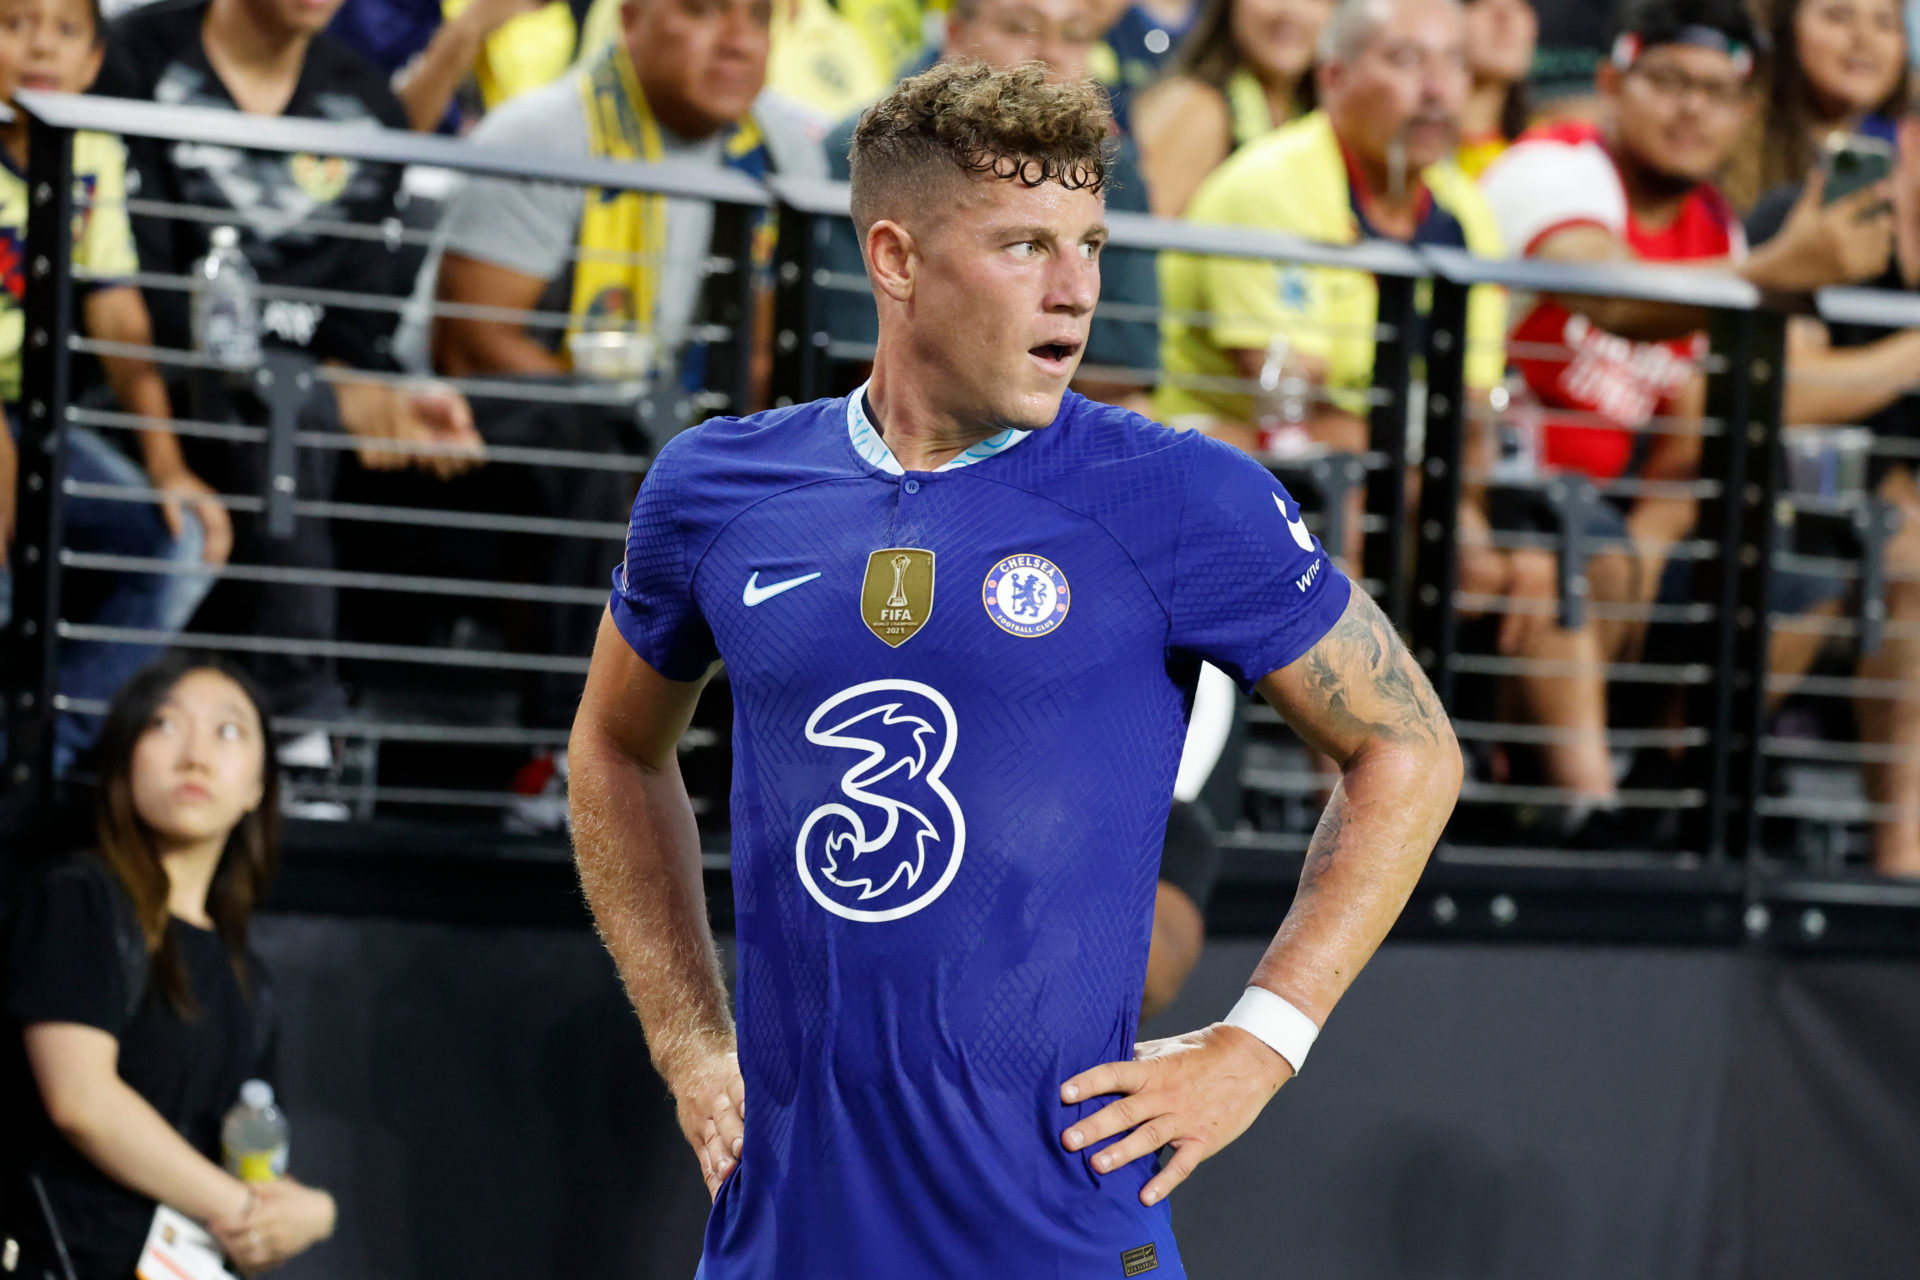 West Ham are reportedly eyeing a move to sign Ross Barkley from Chelsea this summer